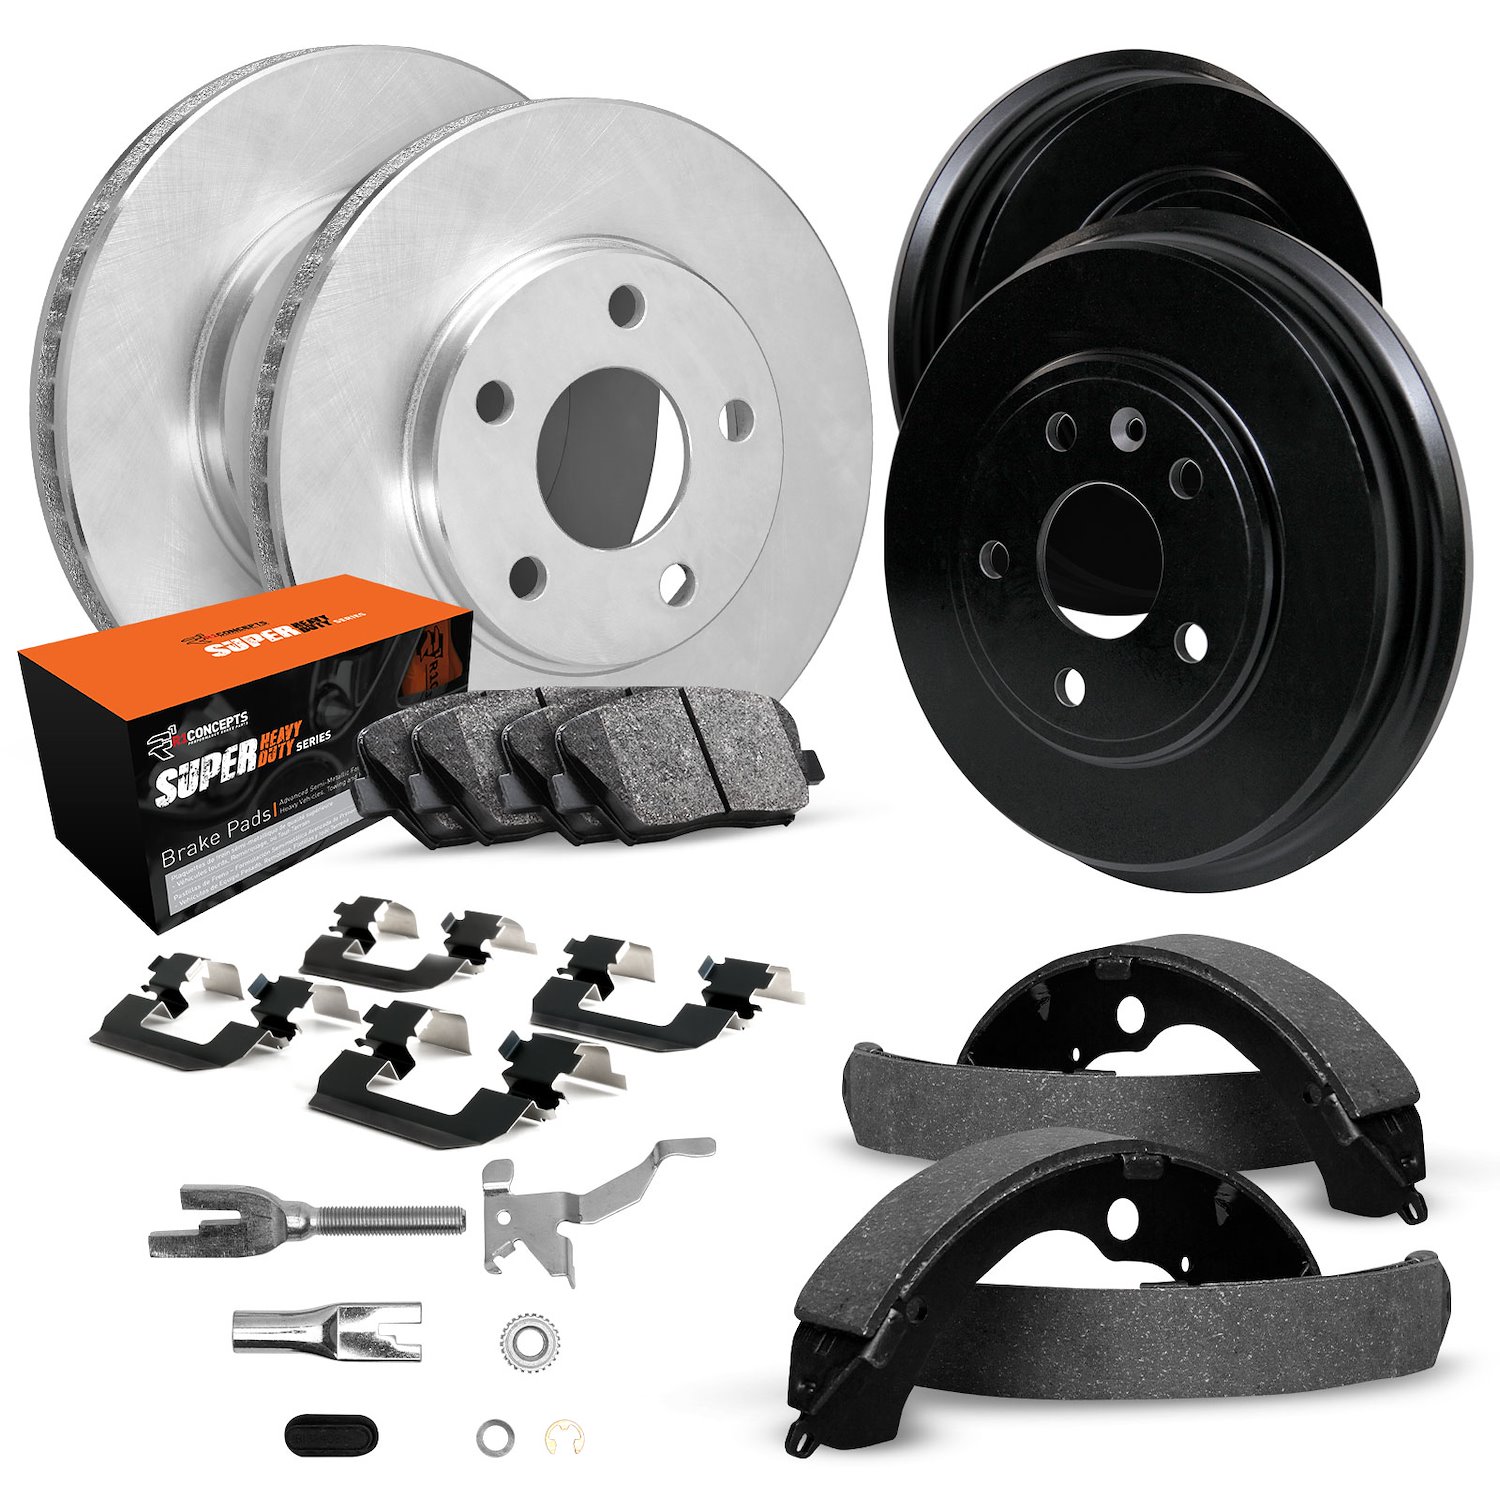 E-Line Blank Brake Rotor & Drum Set w/Super-Duty Pads, Shoes, Hardware, & Adjusters, 1988-1989 GM, Position: Front & Rear